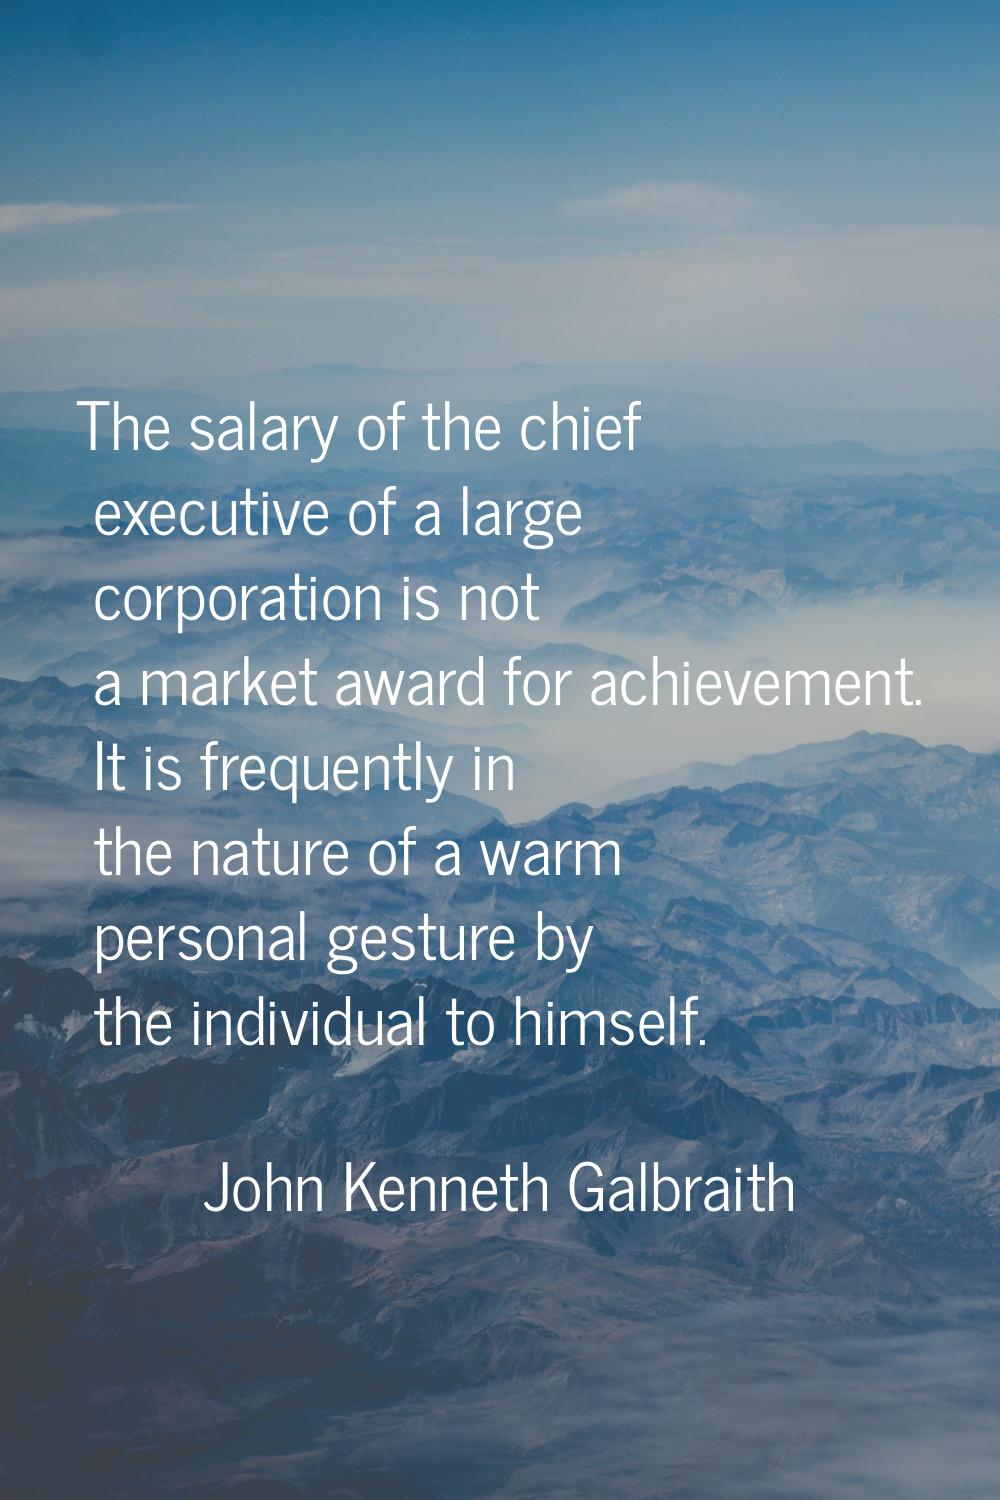 The salary of the chief executive of a large corporation is not a market award for achievement. It 